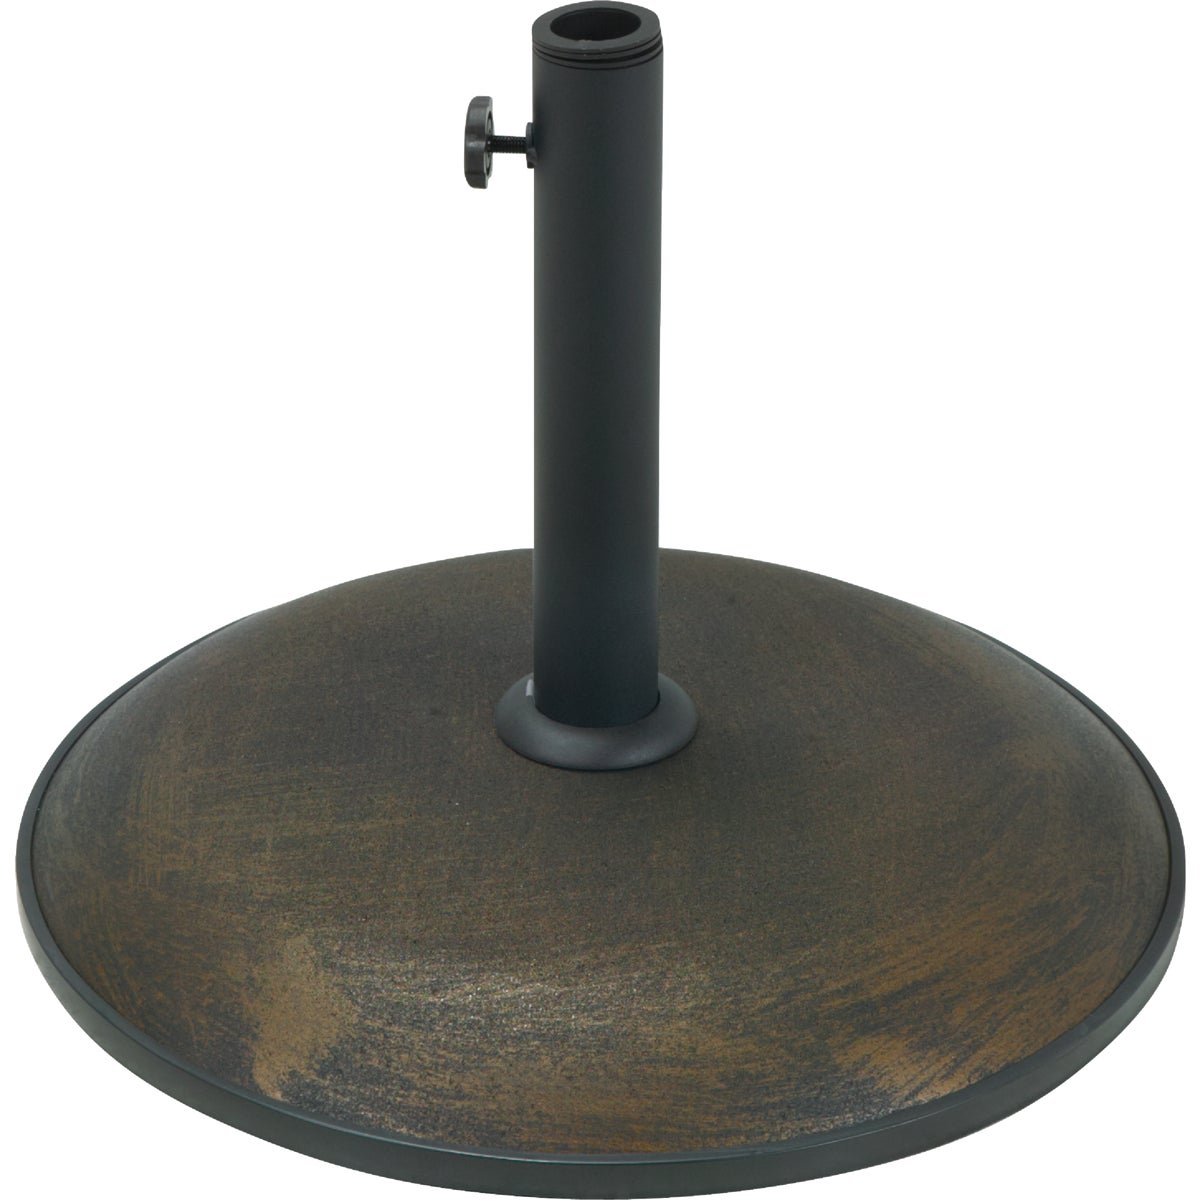 Outdoor Expressions SL-USC-01A Outdoor Expressions 17 In. Round Bronze Concrete Umbrella Base SL-USC-01A